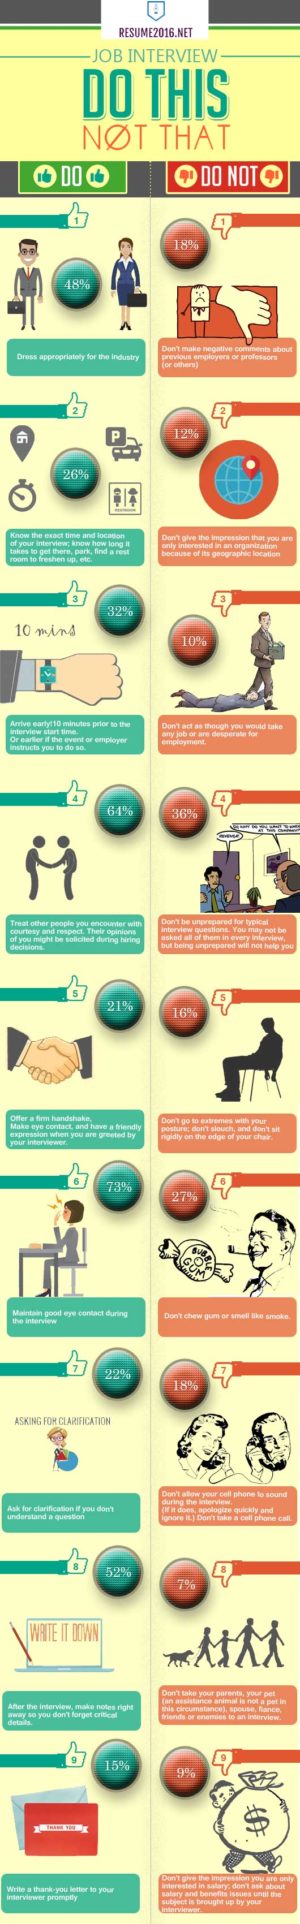 Job Interview Do’s and Dont’s in 2016